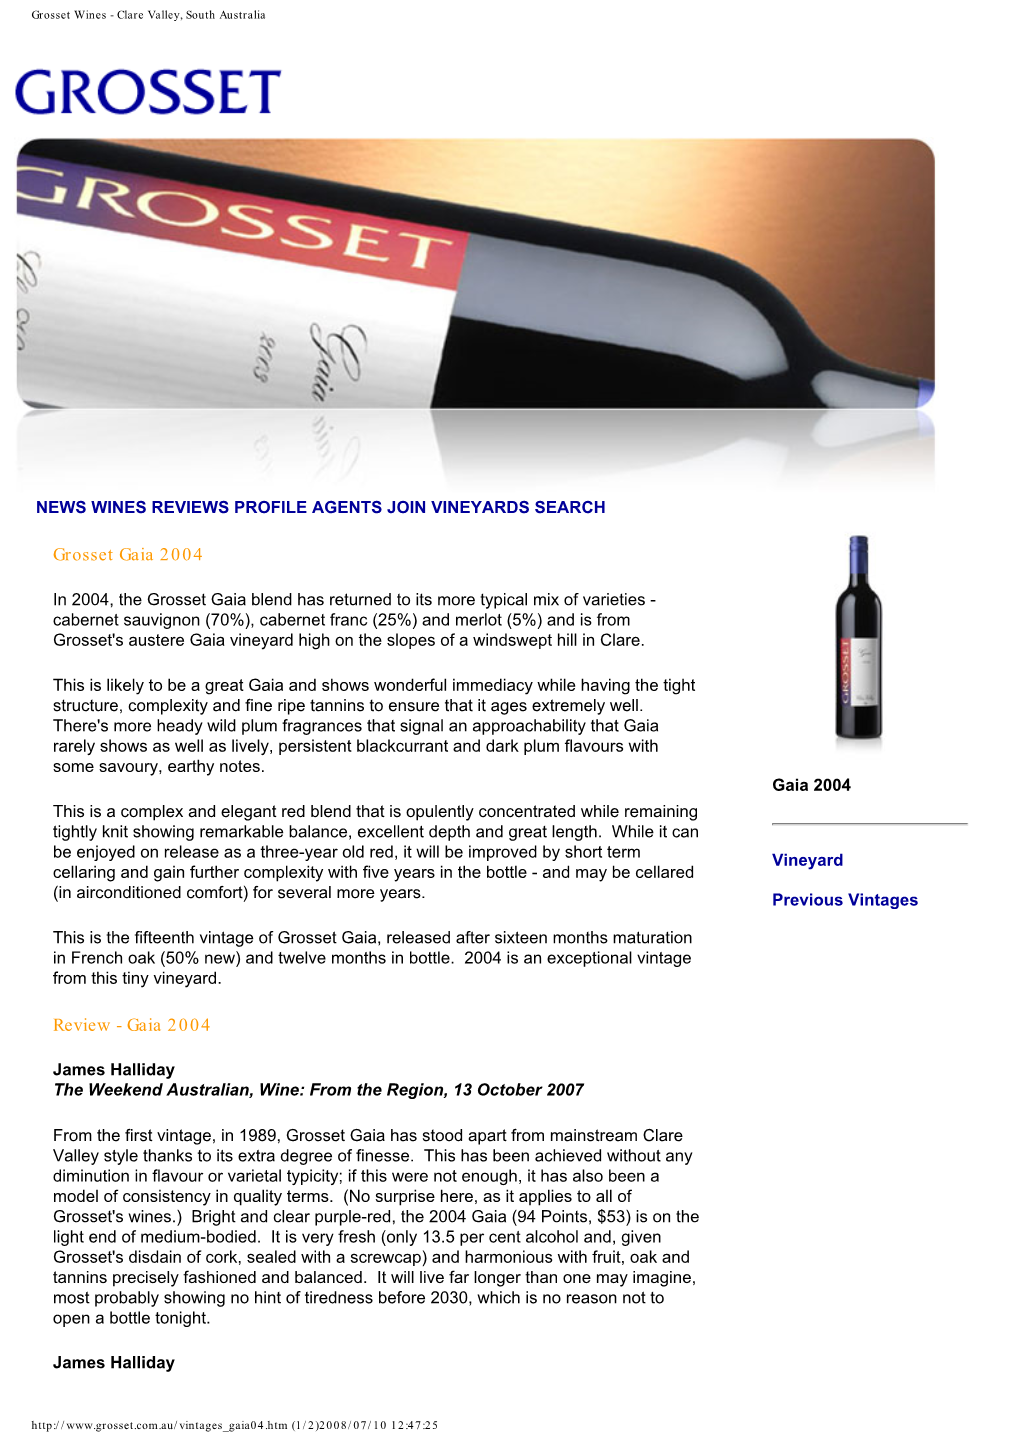 Grosset Wines - Clare Valley, South Australia